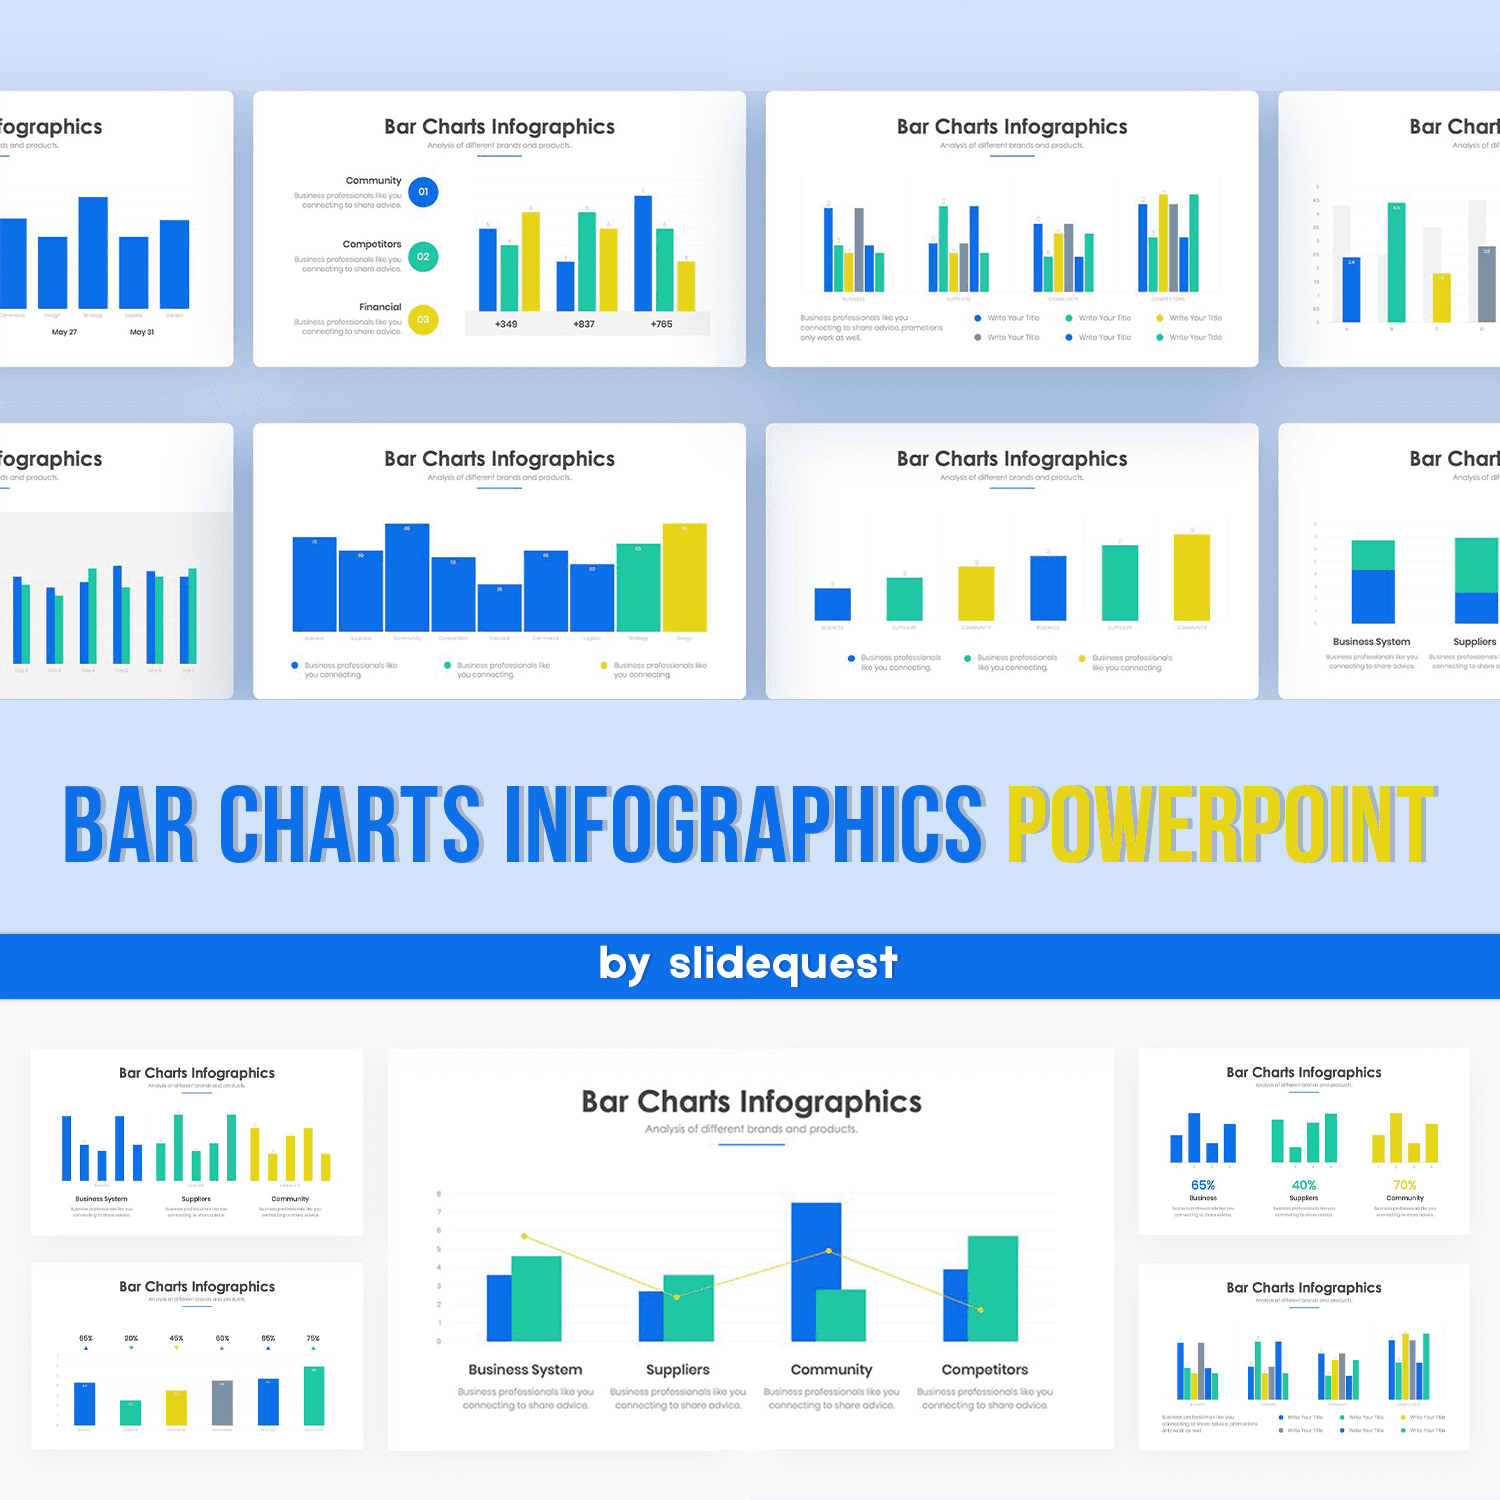 Bar Charts Infographics PowerPoint 2 cover image.